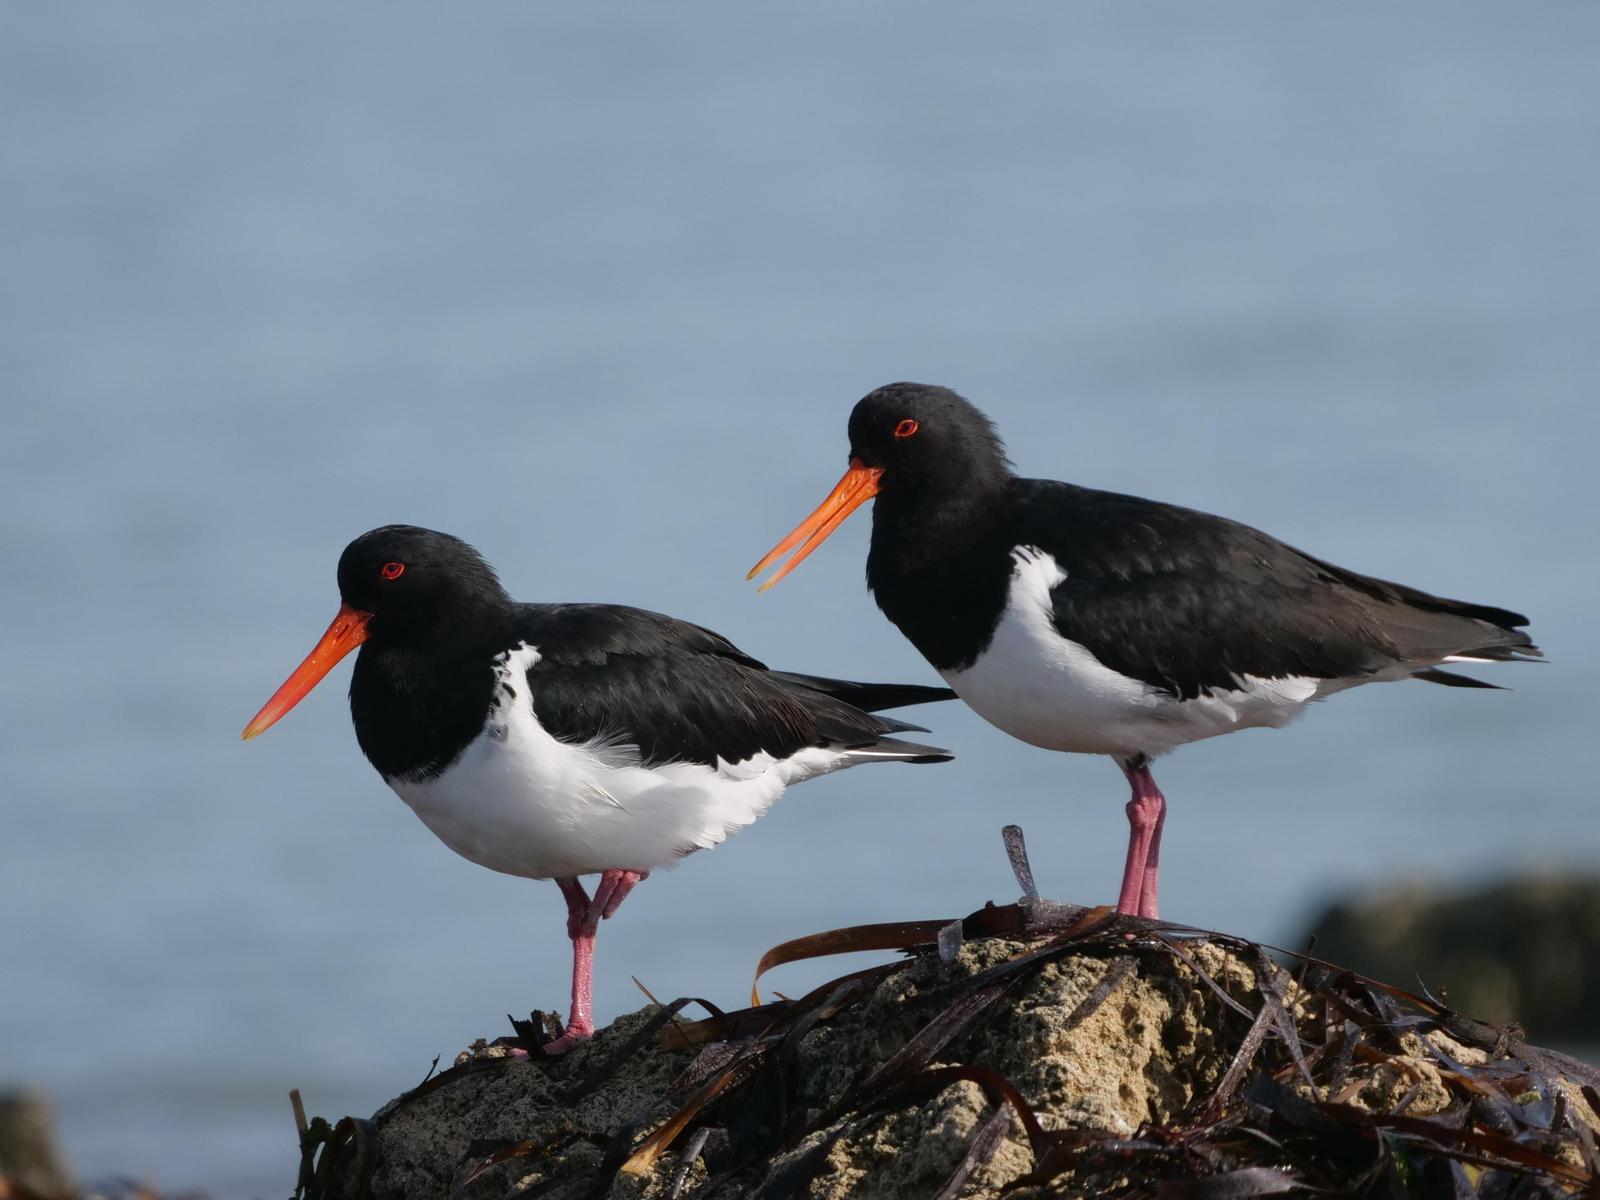 Pied Oystercatcher Photo by Peter Lowe